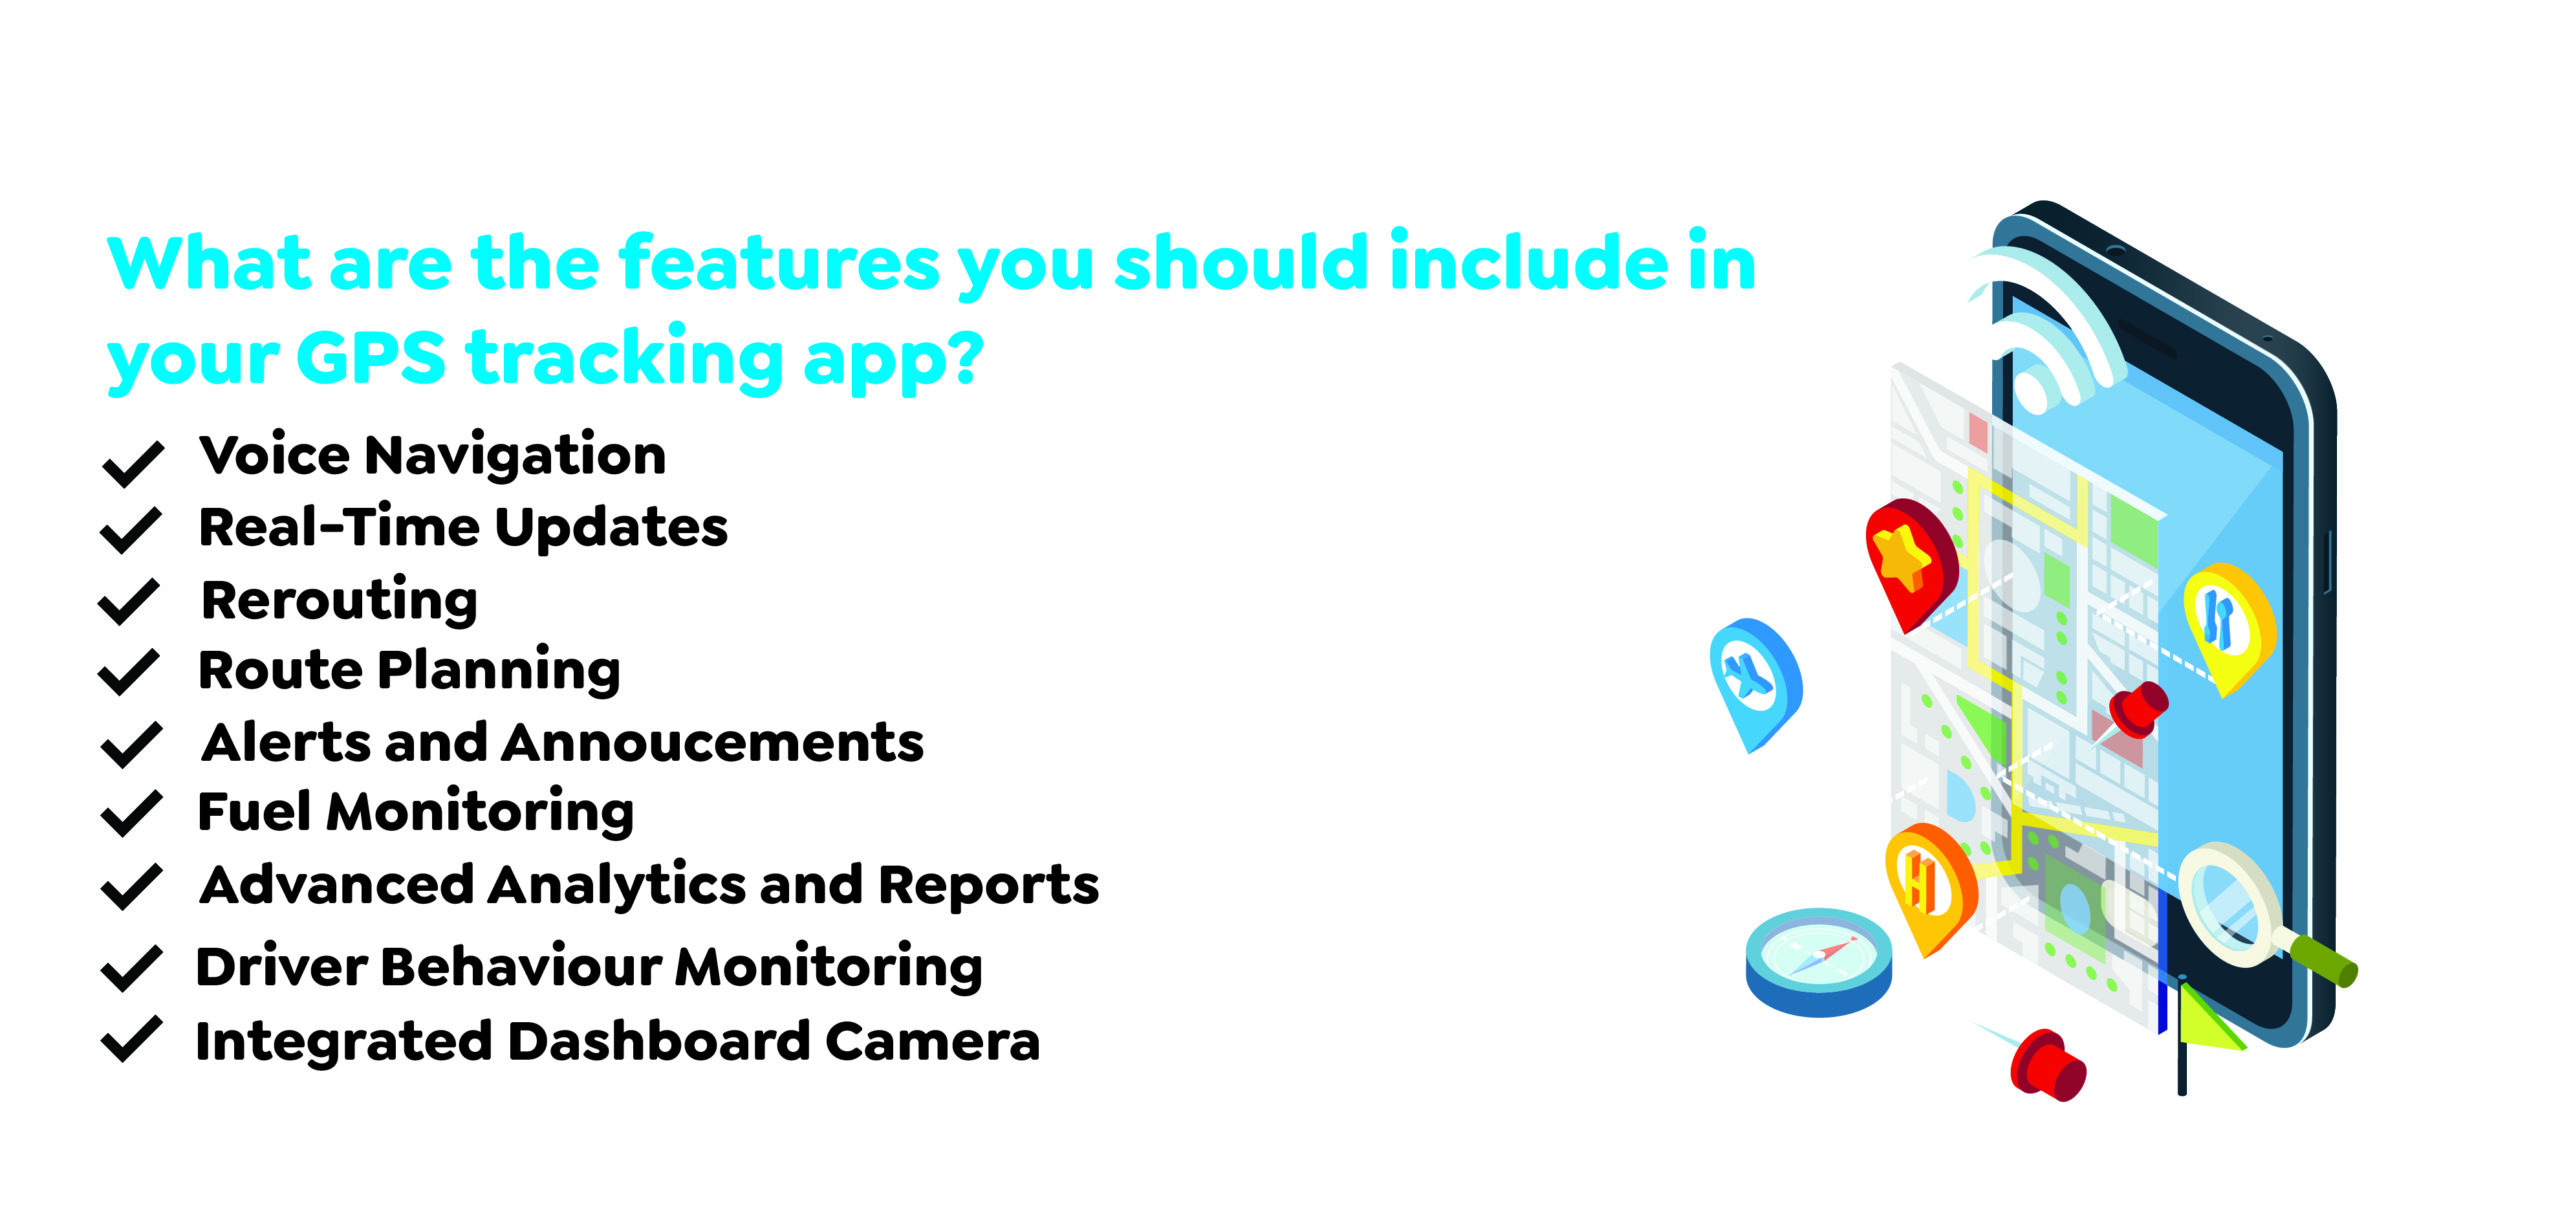 What are the features you should include in your GPS tracking app